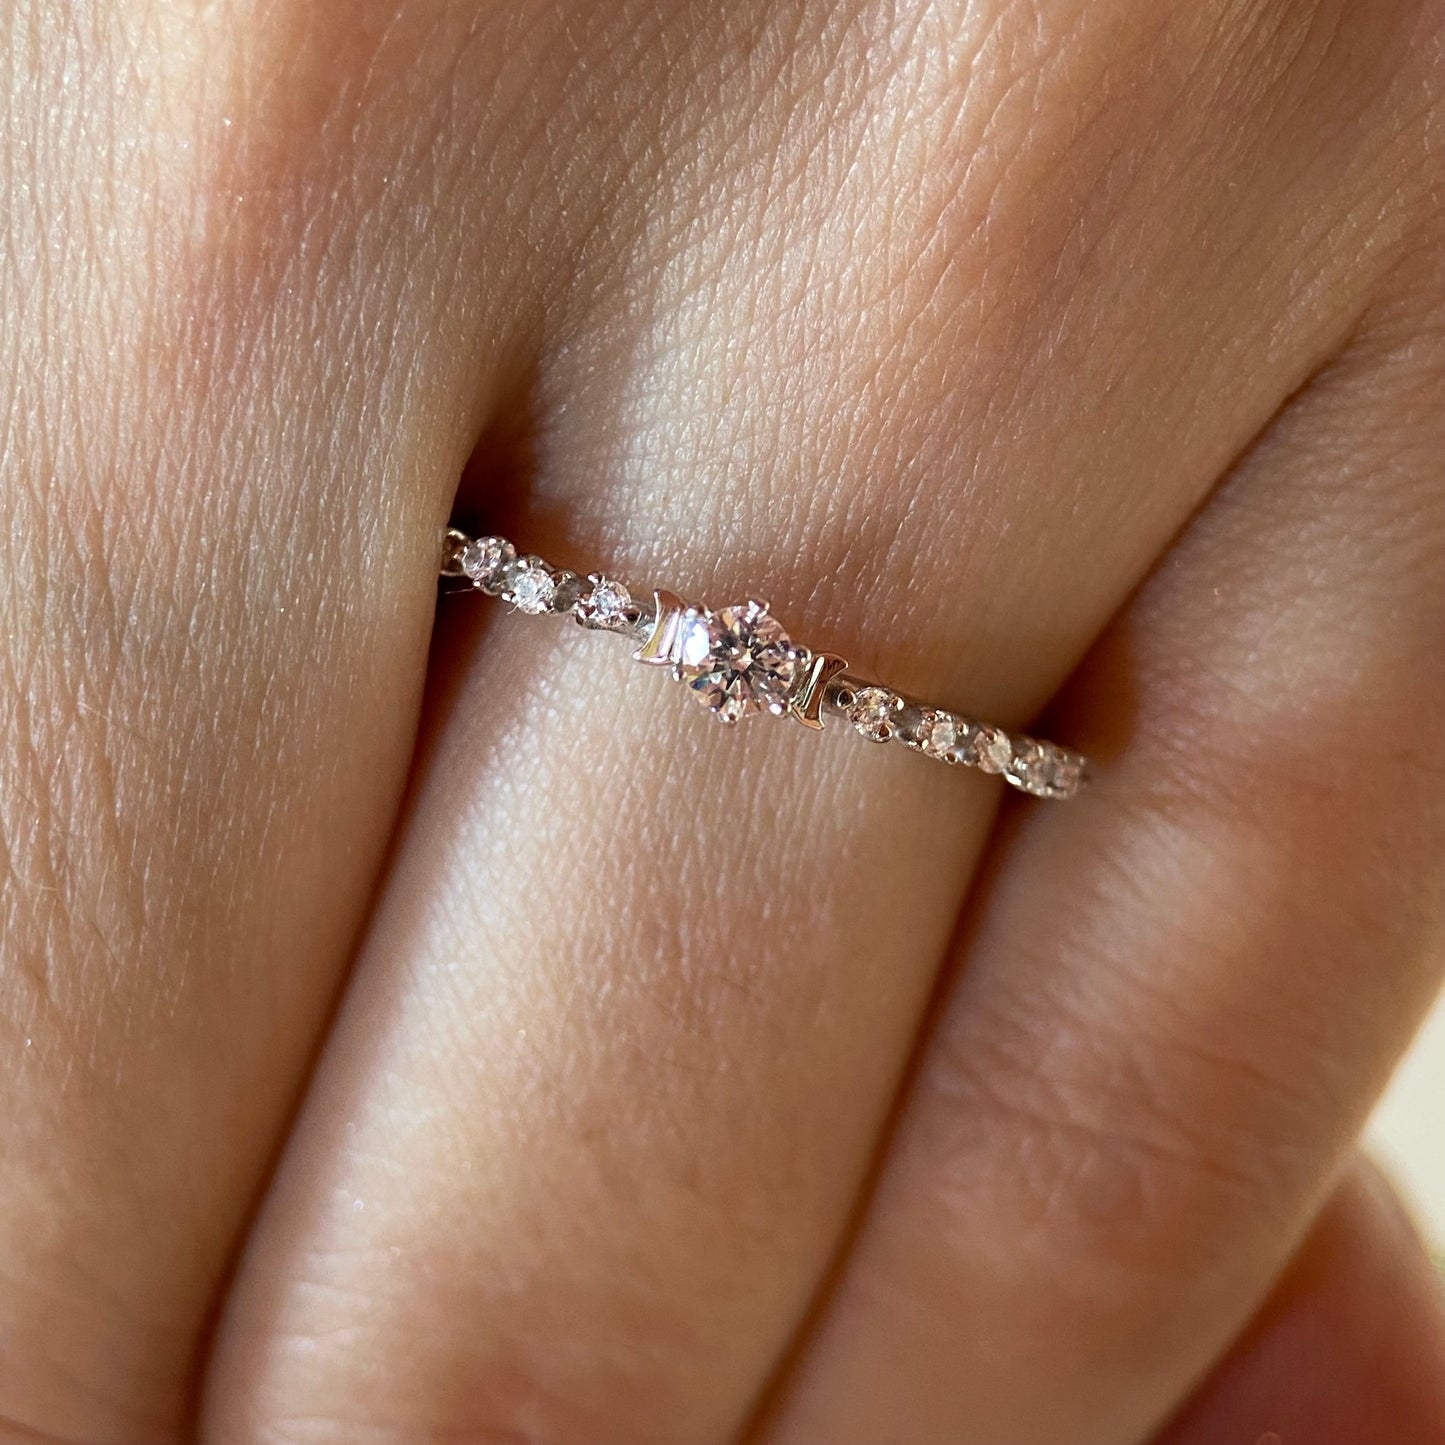 Danielle Ring in 18k White Gold with Zirconia